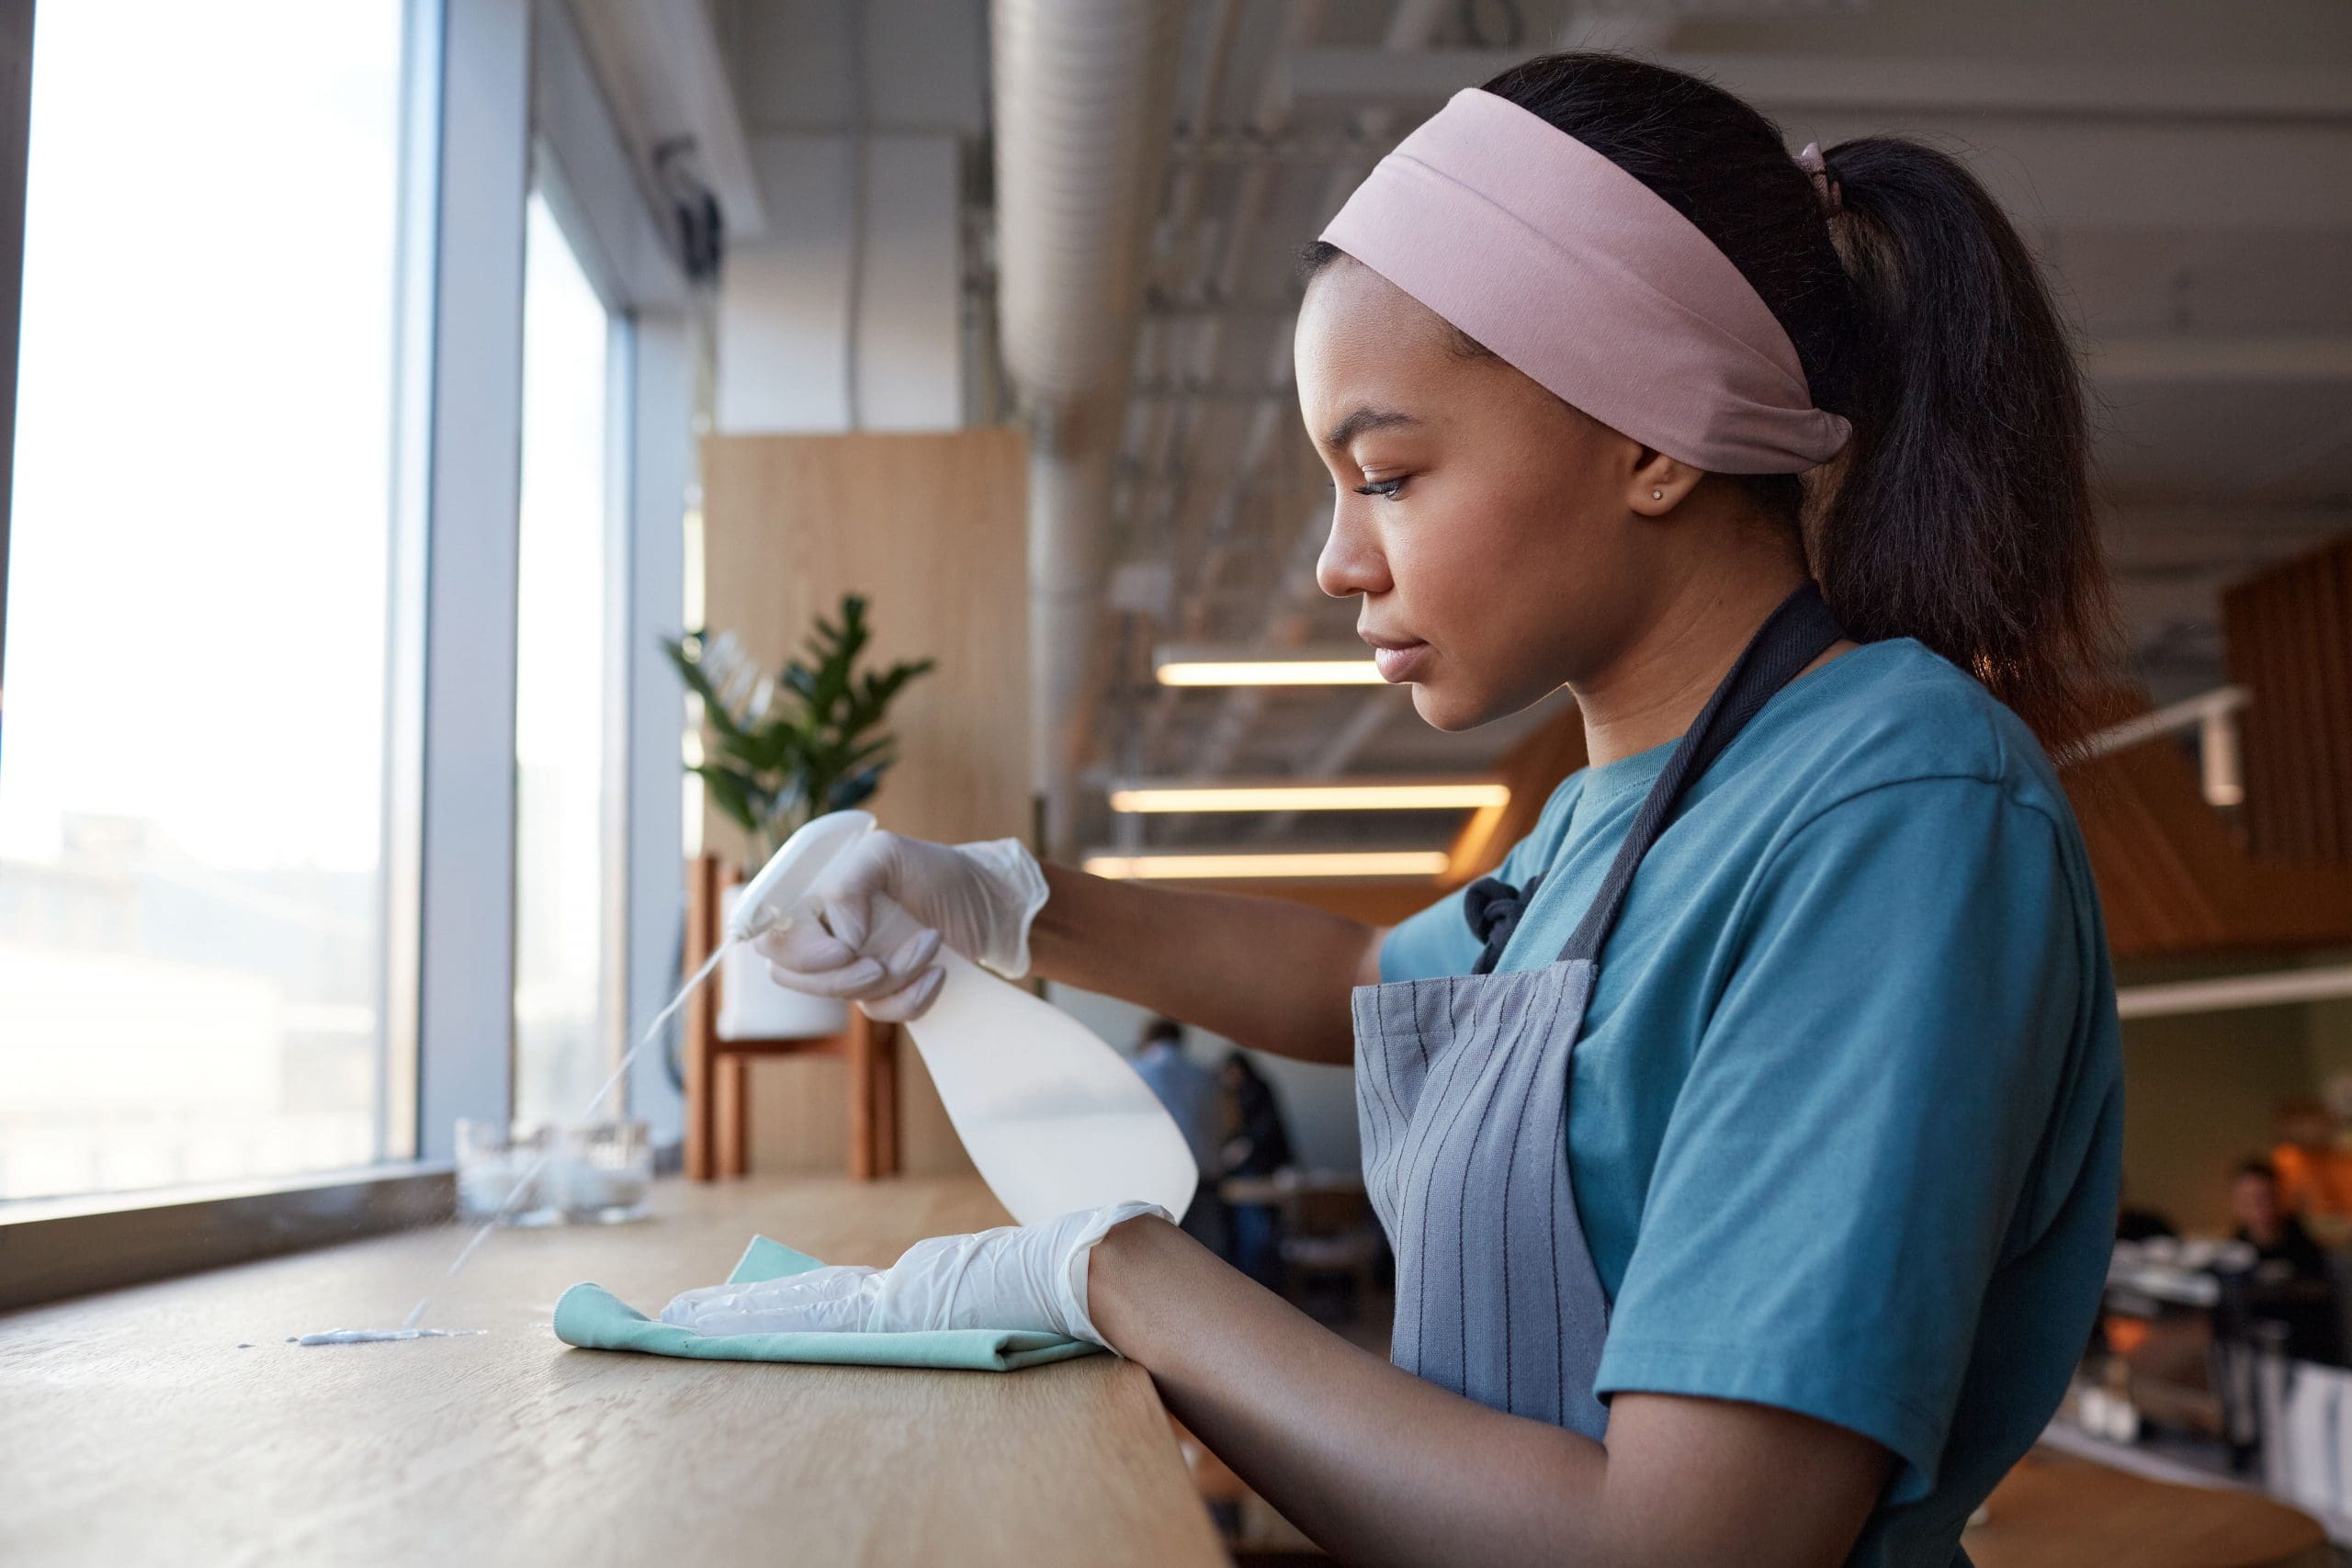 Cleaning-Services-Fort-Lauderdale-ide-view-portrait-young-african-american-woman-cleaning-windows-with-sanitizer-cafe-copy-space-min-scaled